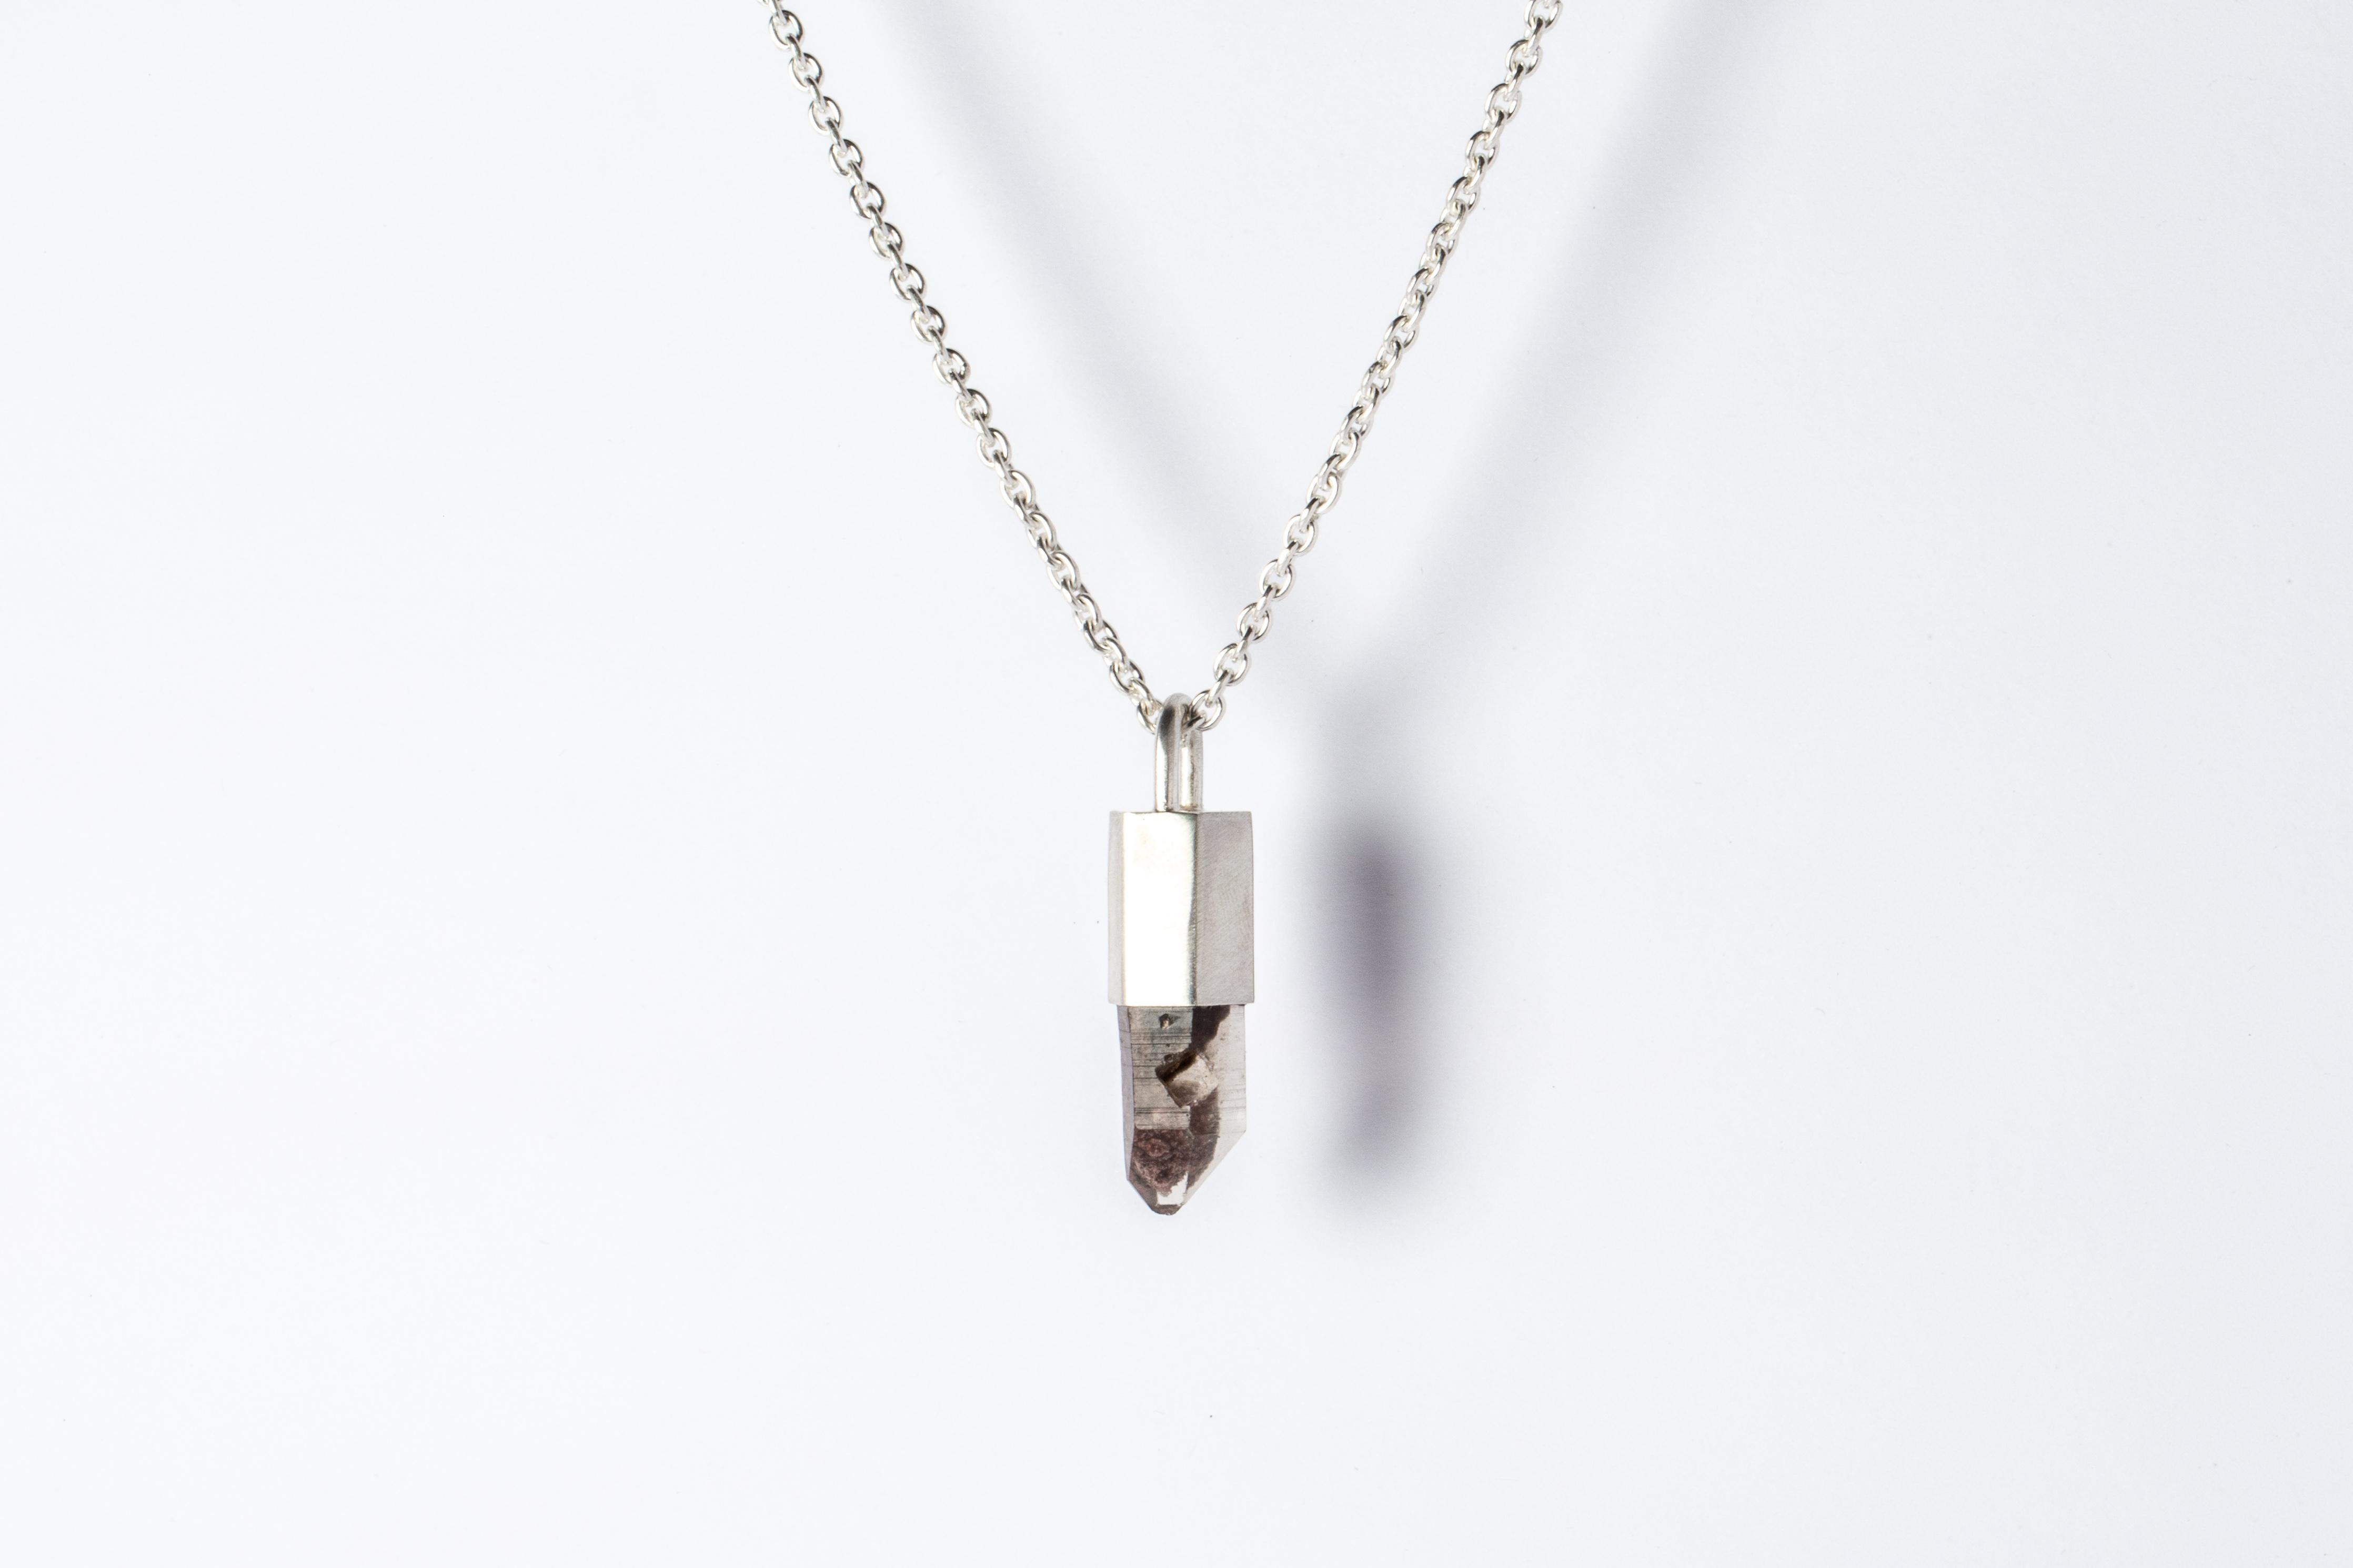 Necklace in matte sterling silver and a rough of garden quartz. It comes on 74 cm sterling silver.
The Talisman series is an exploration into the power of natural crystals. The crystals used in these pieces are discovered through adventure and are